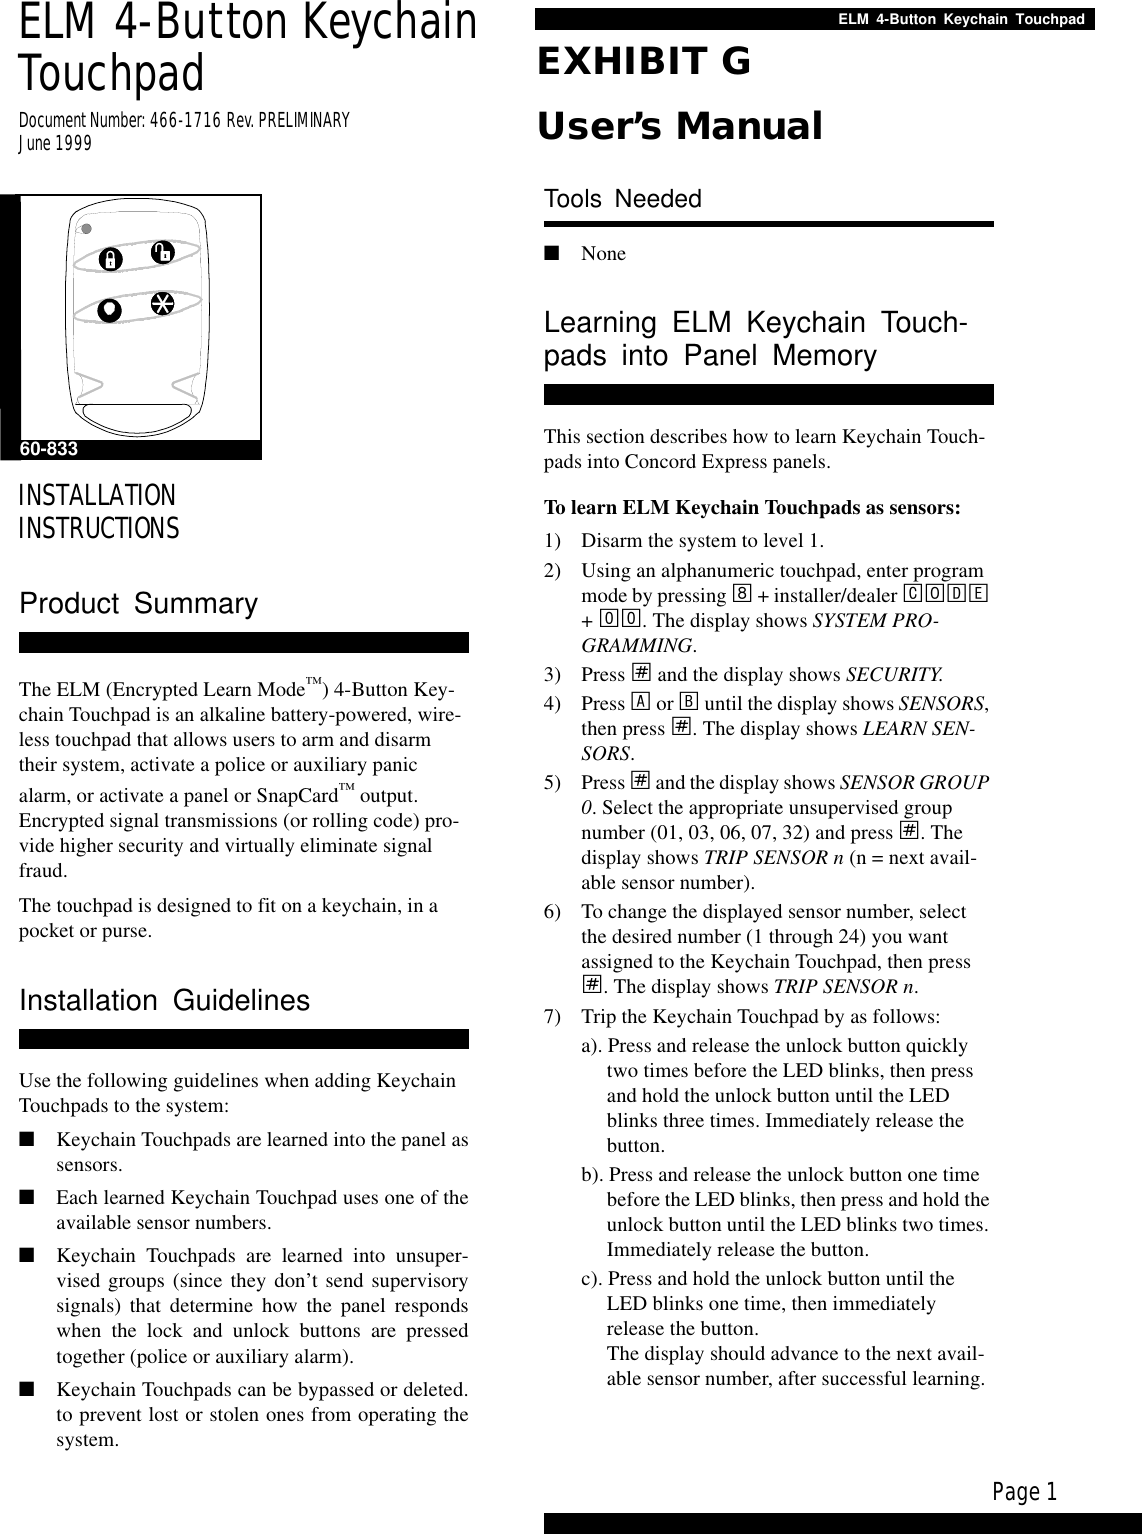 Page 1ELM 4-Button Keychain TouchpadELM 4-Button Keychain TouchpadDocument Number: 466-1716 Rev. PRELIMINARYJune 1999INSTALLATIONINSTRUCTIONSProduct SummaryThe ELM (Encrypted Learn Mode™) 4-Button Key-chain Touchpad is an alkaline battery-powered, wire-less touchpad that allows users to arm and disarm their system, activate a police or auxiliary panic alarm, or activate a panel or SnapCard™ output. Encrypted signal transmissions (or rolling code) pro-vide higher security and virtually eliminate signal fraud.The touchpad is designed to fit on a keychain, in a pocket or purse.Installation GuidelinesUse the following guidelines when adding Keychain Touchpads to the system:■Keychain Touchpads are learned into the panel assensors.■Each learned Keychain Touchpad uses one of theavailable sensor numbers.■Keychain Touchpads are learned into unsuper-vised groups (since they don’t send supervisorysignals) that determine how the panel respondswhen the lock and unlock buttons are pressedtogether (police or auxiliary alarm).■Keychain Touchpads can be bypassed or deleted.to prevent lost or stolen ones from operating thesystem.Tools Needed■NoneLearning ELM Keychain Touch-pads into Panel MemoryThis section describes how to learn Keychain Touch-pads into Concord Express panels.To learn ELM Keychain Touchpads as sensors:1) Disarm the system to level 1.2) Using an alphanumeric touchpad, enter program mode by pressing 8 + installer/dealer CODE + 00. The display shows SYSTEM PRO-GRAMMING.3) Press ƒ and the display shows SECURITY.4) Press A or B until the display shows SENSORS, then press ƒ. The display shows LEARN SEN-SORS.5) Press ƒ and the display shows SENSOR GROUP 0. Select the appropriate unsupervised group number (01, 03, 06, 07, 32) and press ƒ. The display shows TRIP SENSOR n (n = next avail-able sensor number).6) To change the displayed sensor number, select the desired number (1 through 24) you want assigned to the Keychain Touchpad, then press ƒ. The display shows TRIP SENSOR n.7) Trip the Keychain Touchpad by as follows:a). Press and release the unlock button quickly two times before the LED blinks, then press and hold the unlock button until the LED blinks three times. Immediately release the button.b). Press and release the unlock button one time before the LED blinks, then press and hold the unlock button until the LED blinks two times. Immediately release the button.c). Press and hold the unlock button until the LED blinks one time, then immediately release the button.The display should advance to the next avail-able sensor number, after successful learning.60-833EXHIBIT GUser’s Manual